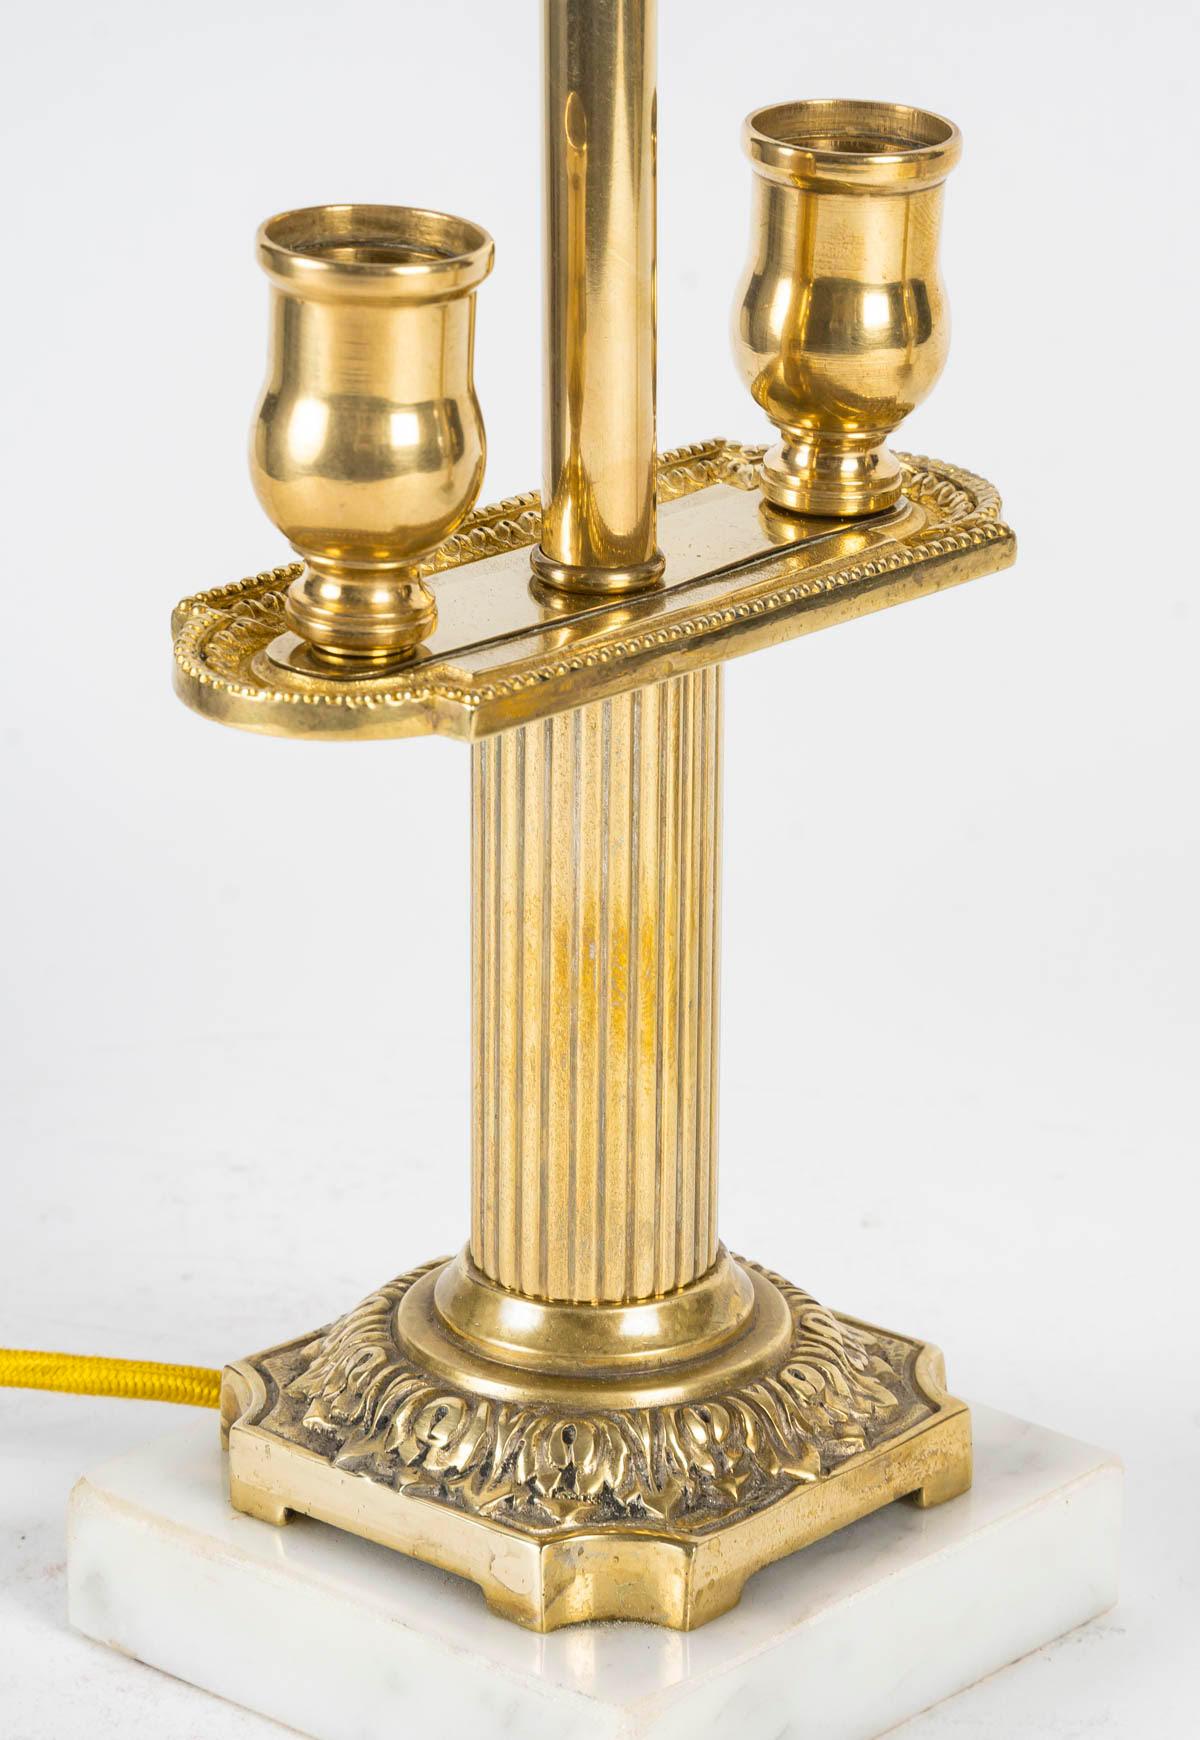 French Pair of Candlesticks Mounted as Table Lamps, 19th Century, Napoleon III Period. For Sale